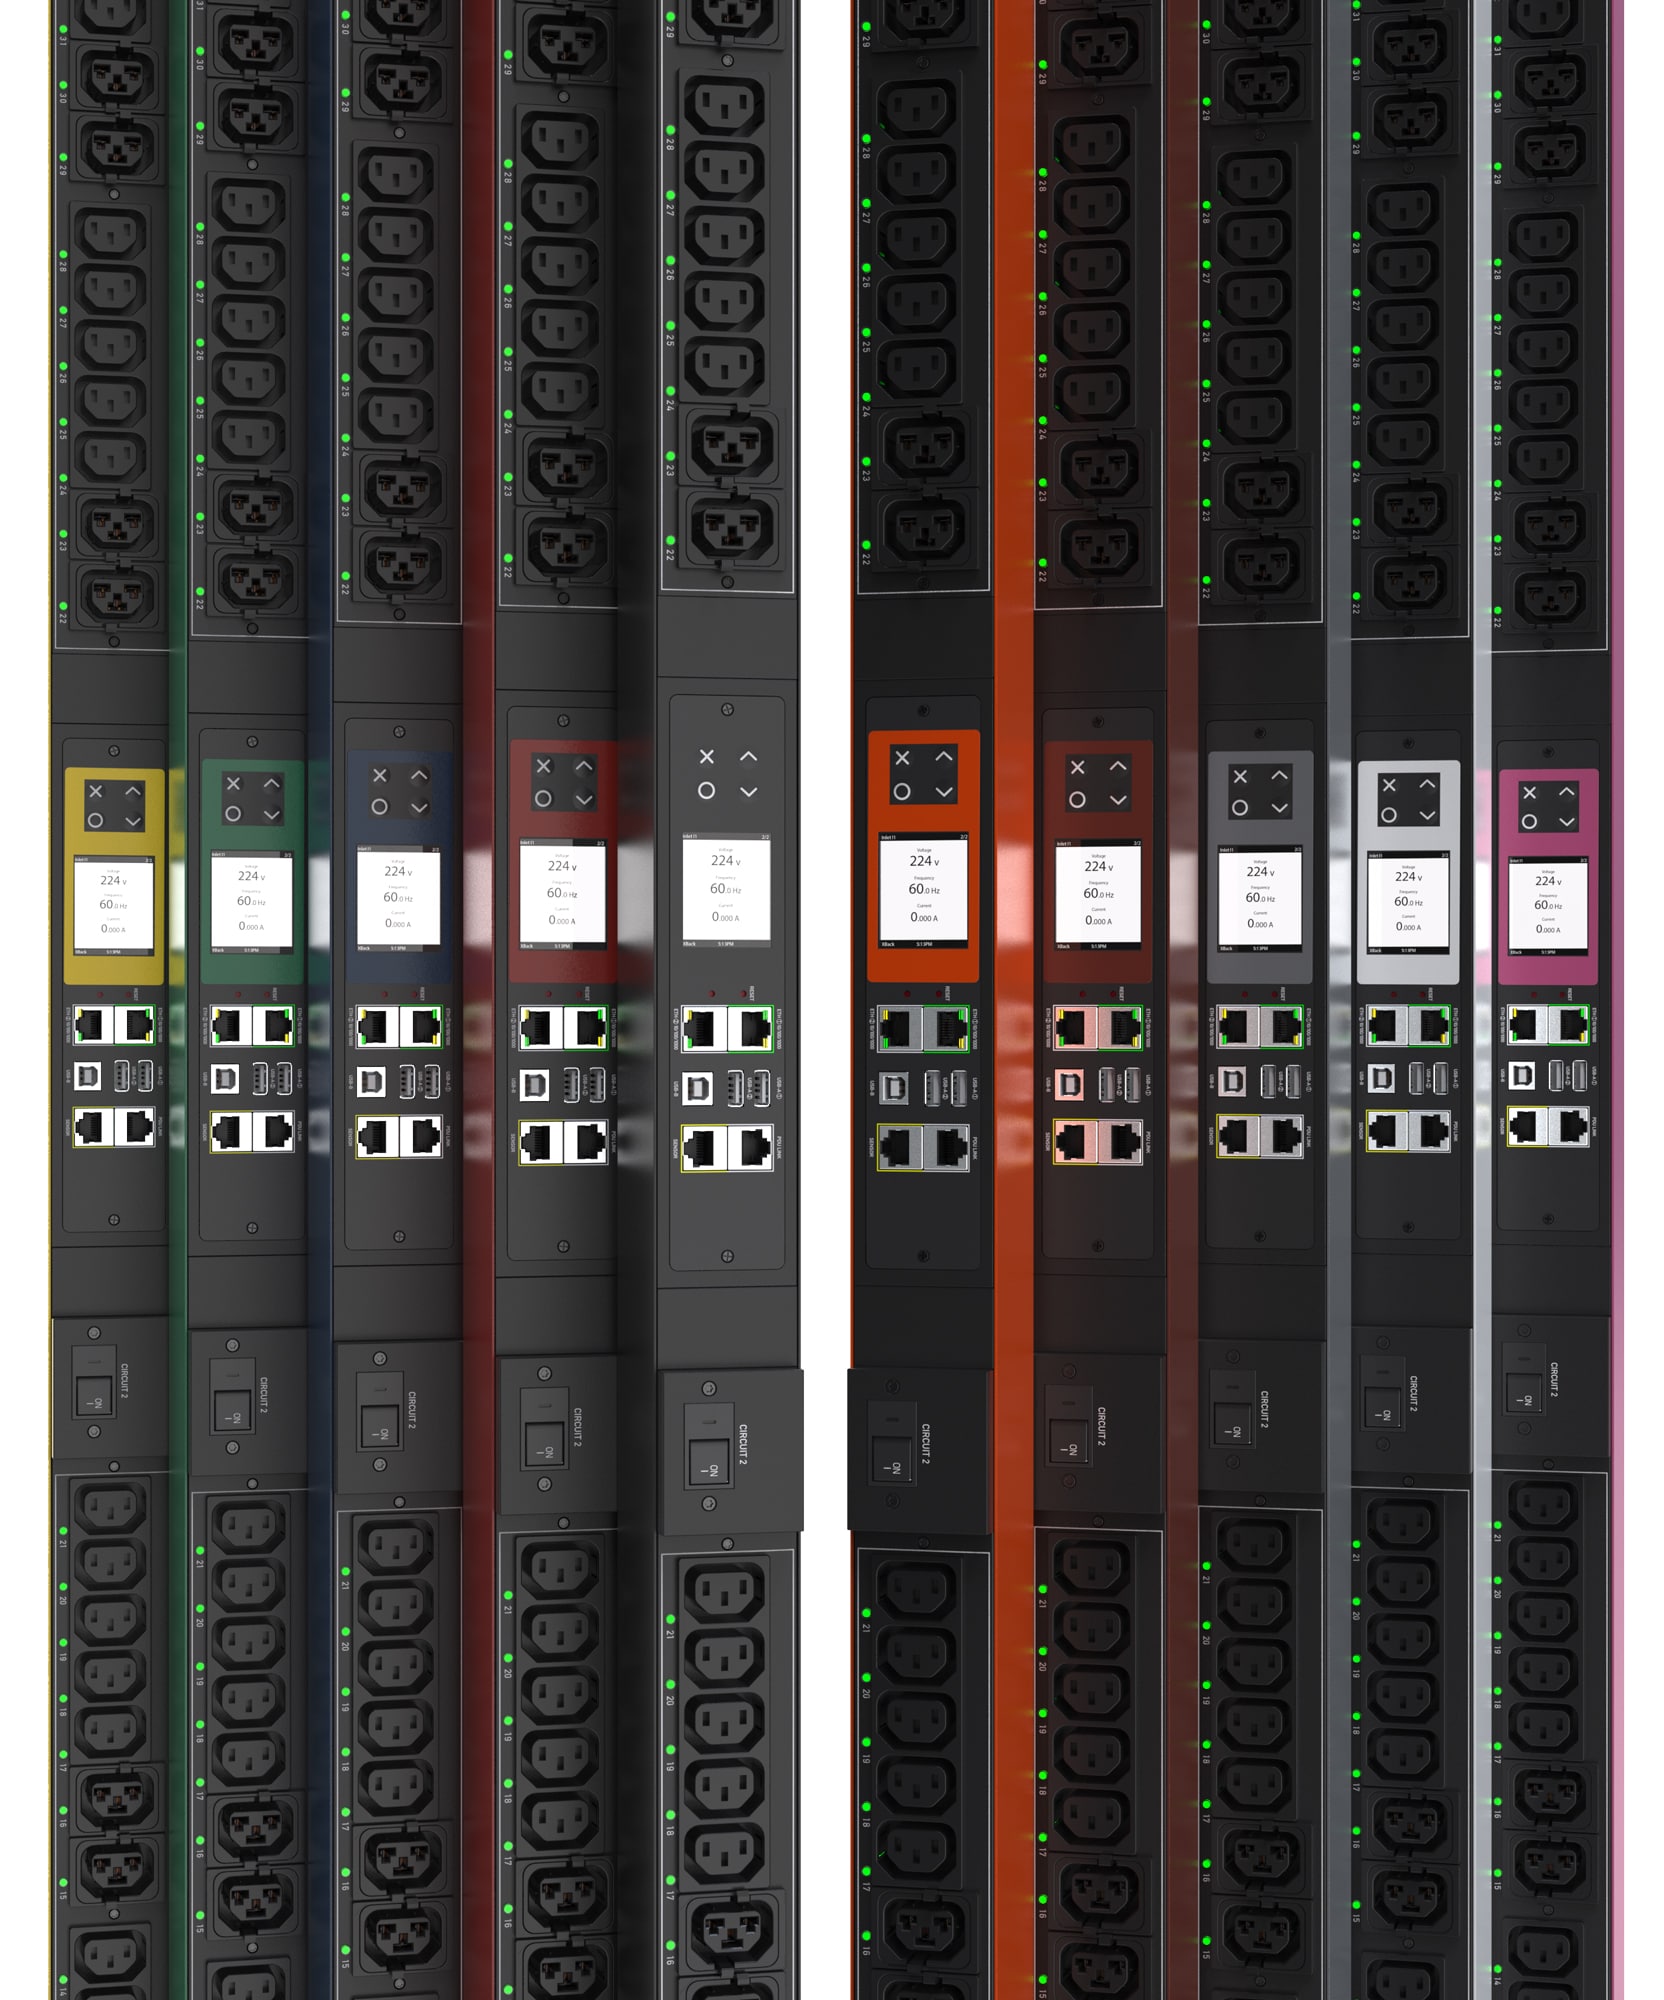 Server Technology PRO4X PDU - Managing Power Distribution for Efficient AI Operations.